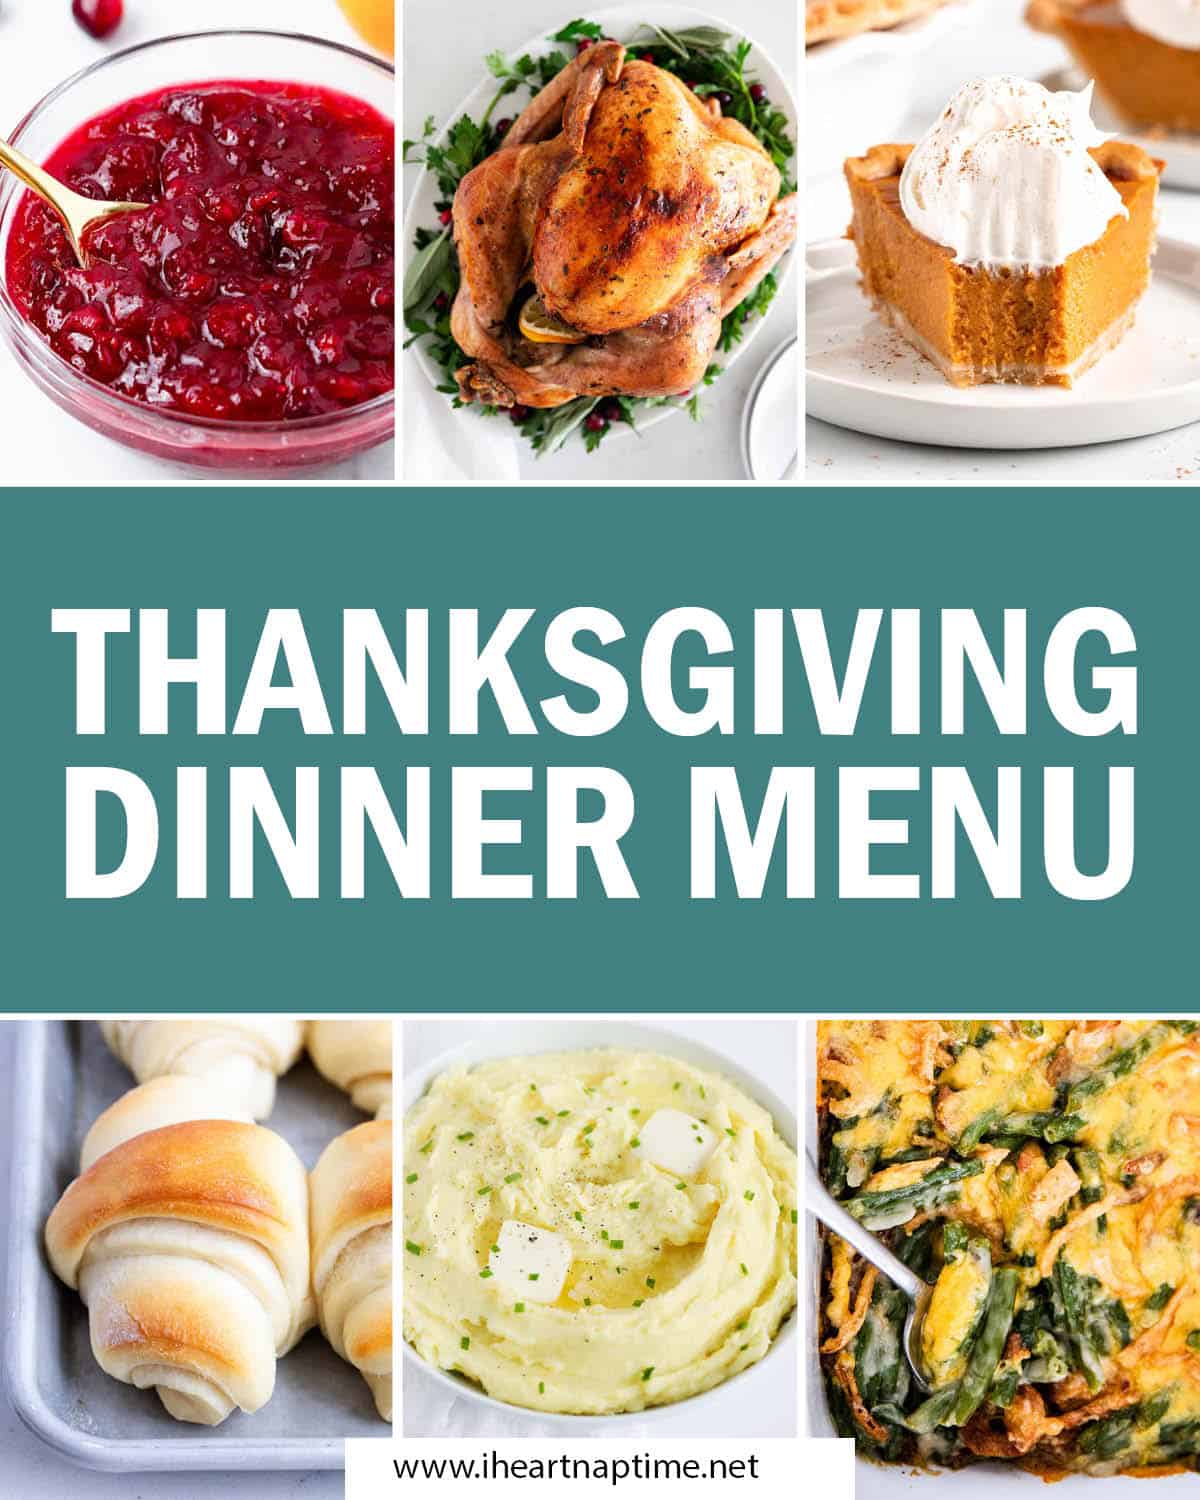 A photo collage showing Thanksgiving dinner menu options.